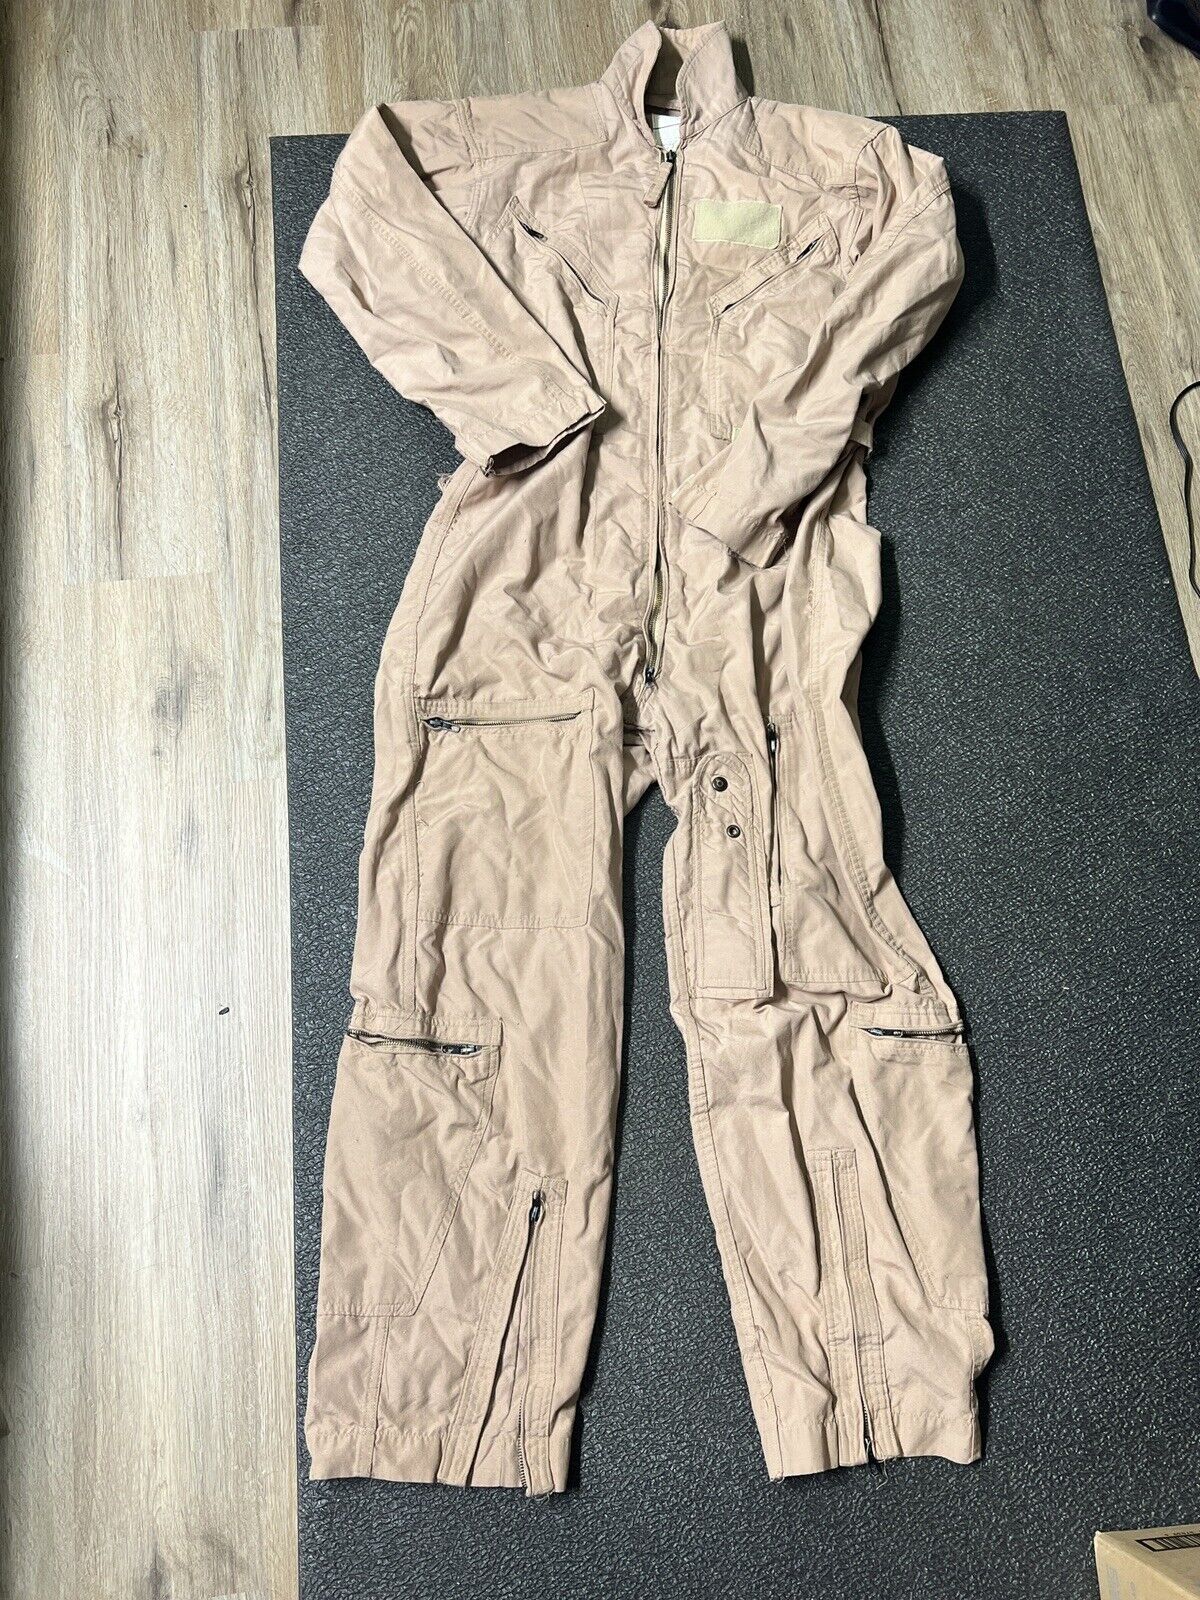 USAF US Military CWU-27/P Flyers Coveralls Flight Suit Desert Tan 42 R